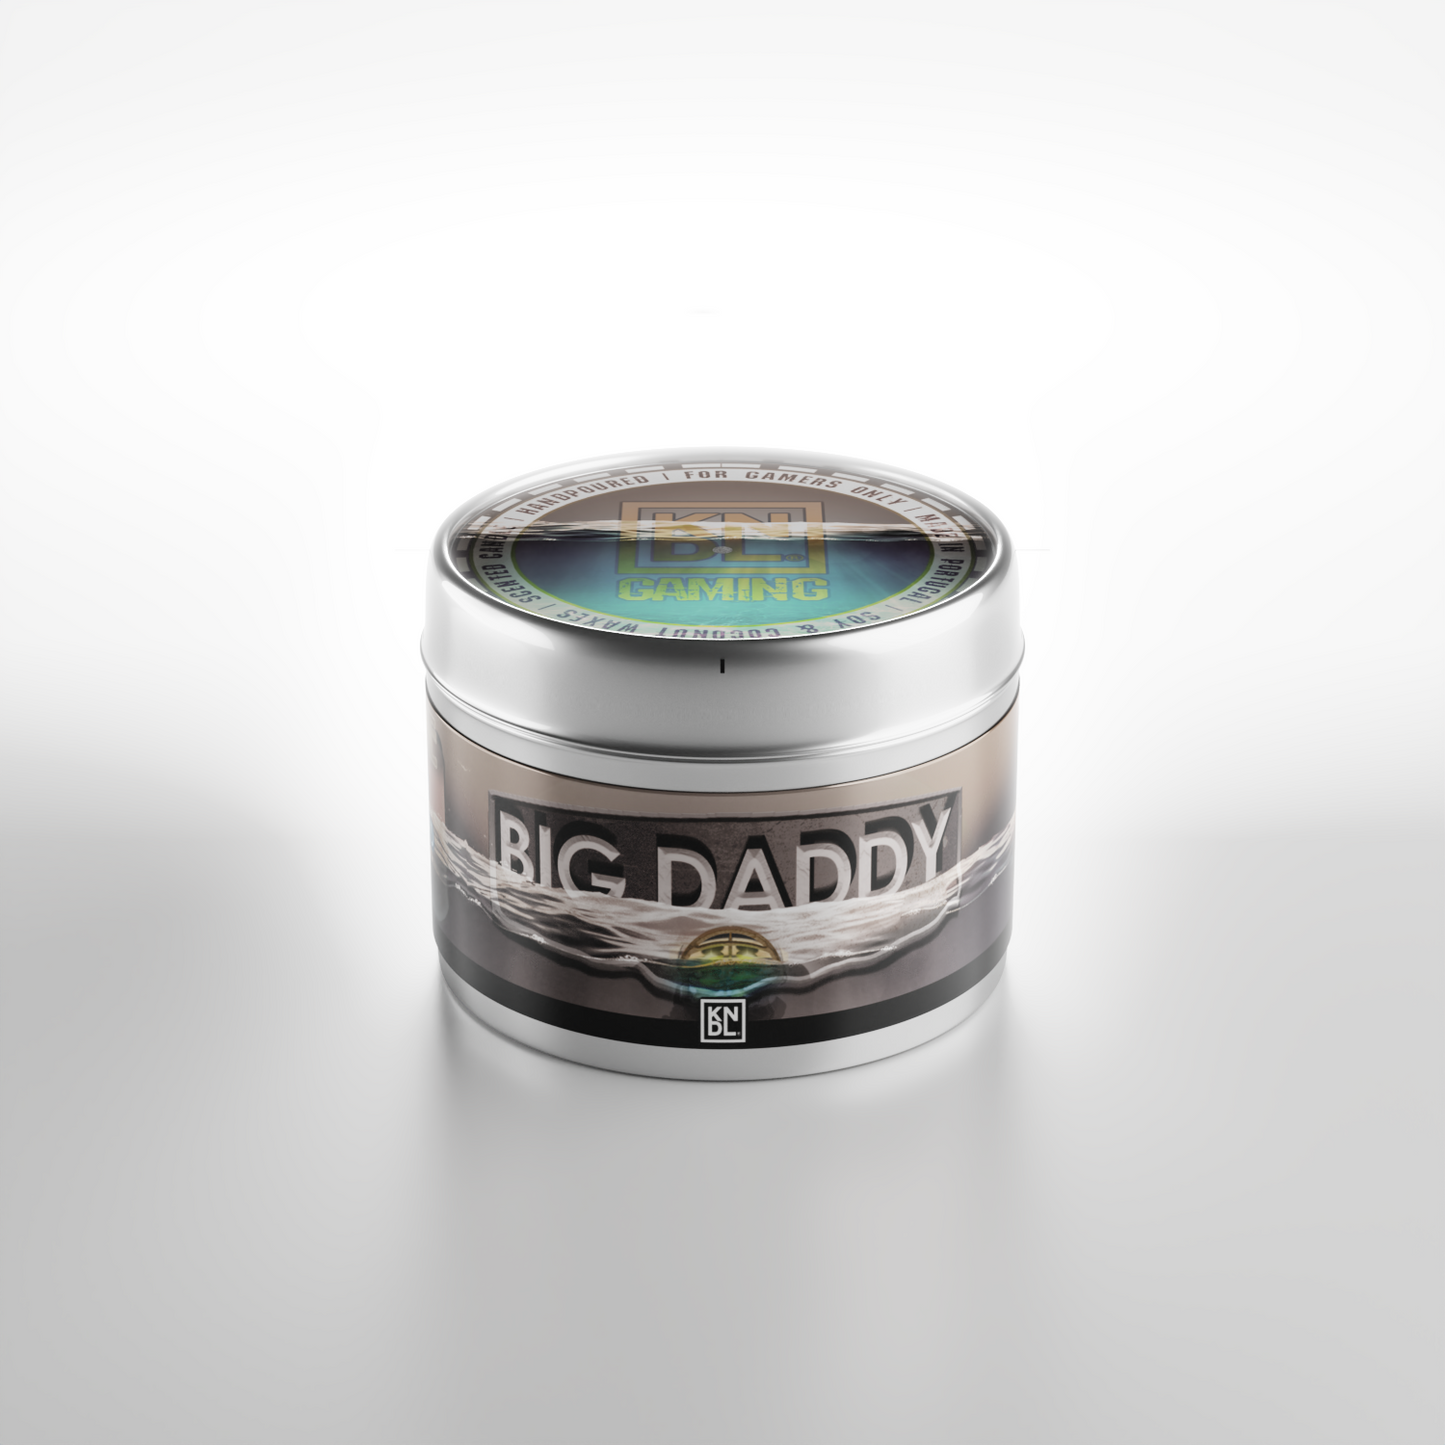 TIN NR 26 | BIG DADDY | BIOSHOCK INSPIRED SCENTED CANDLE